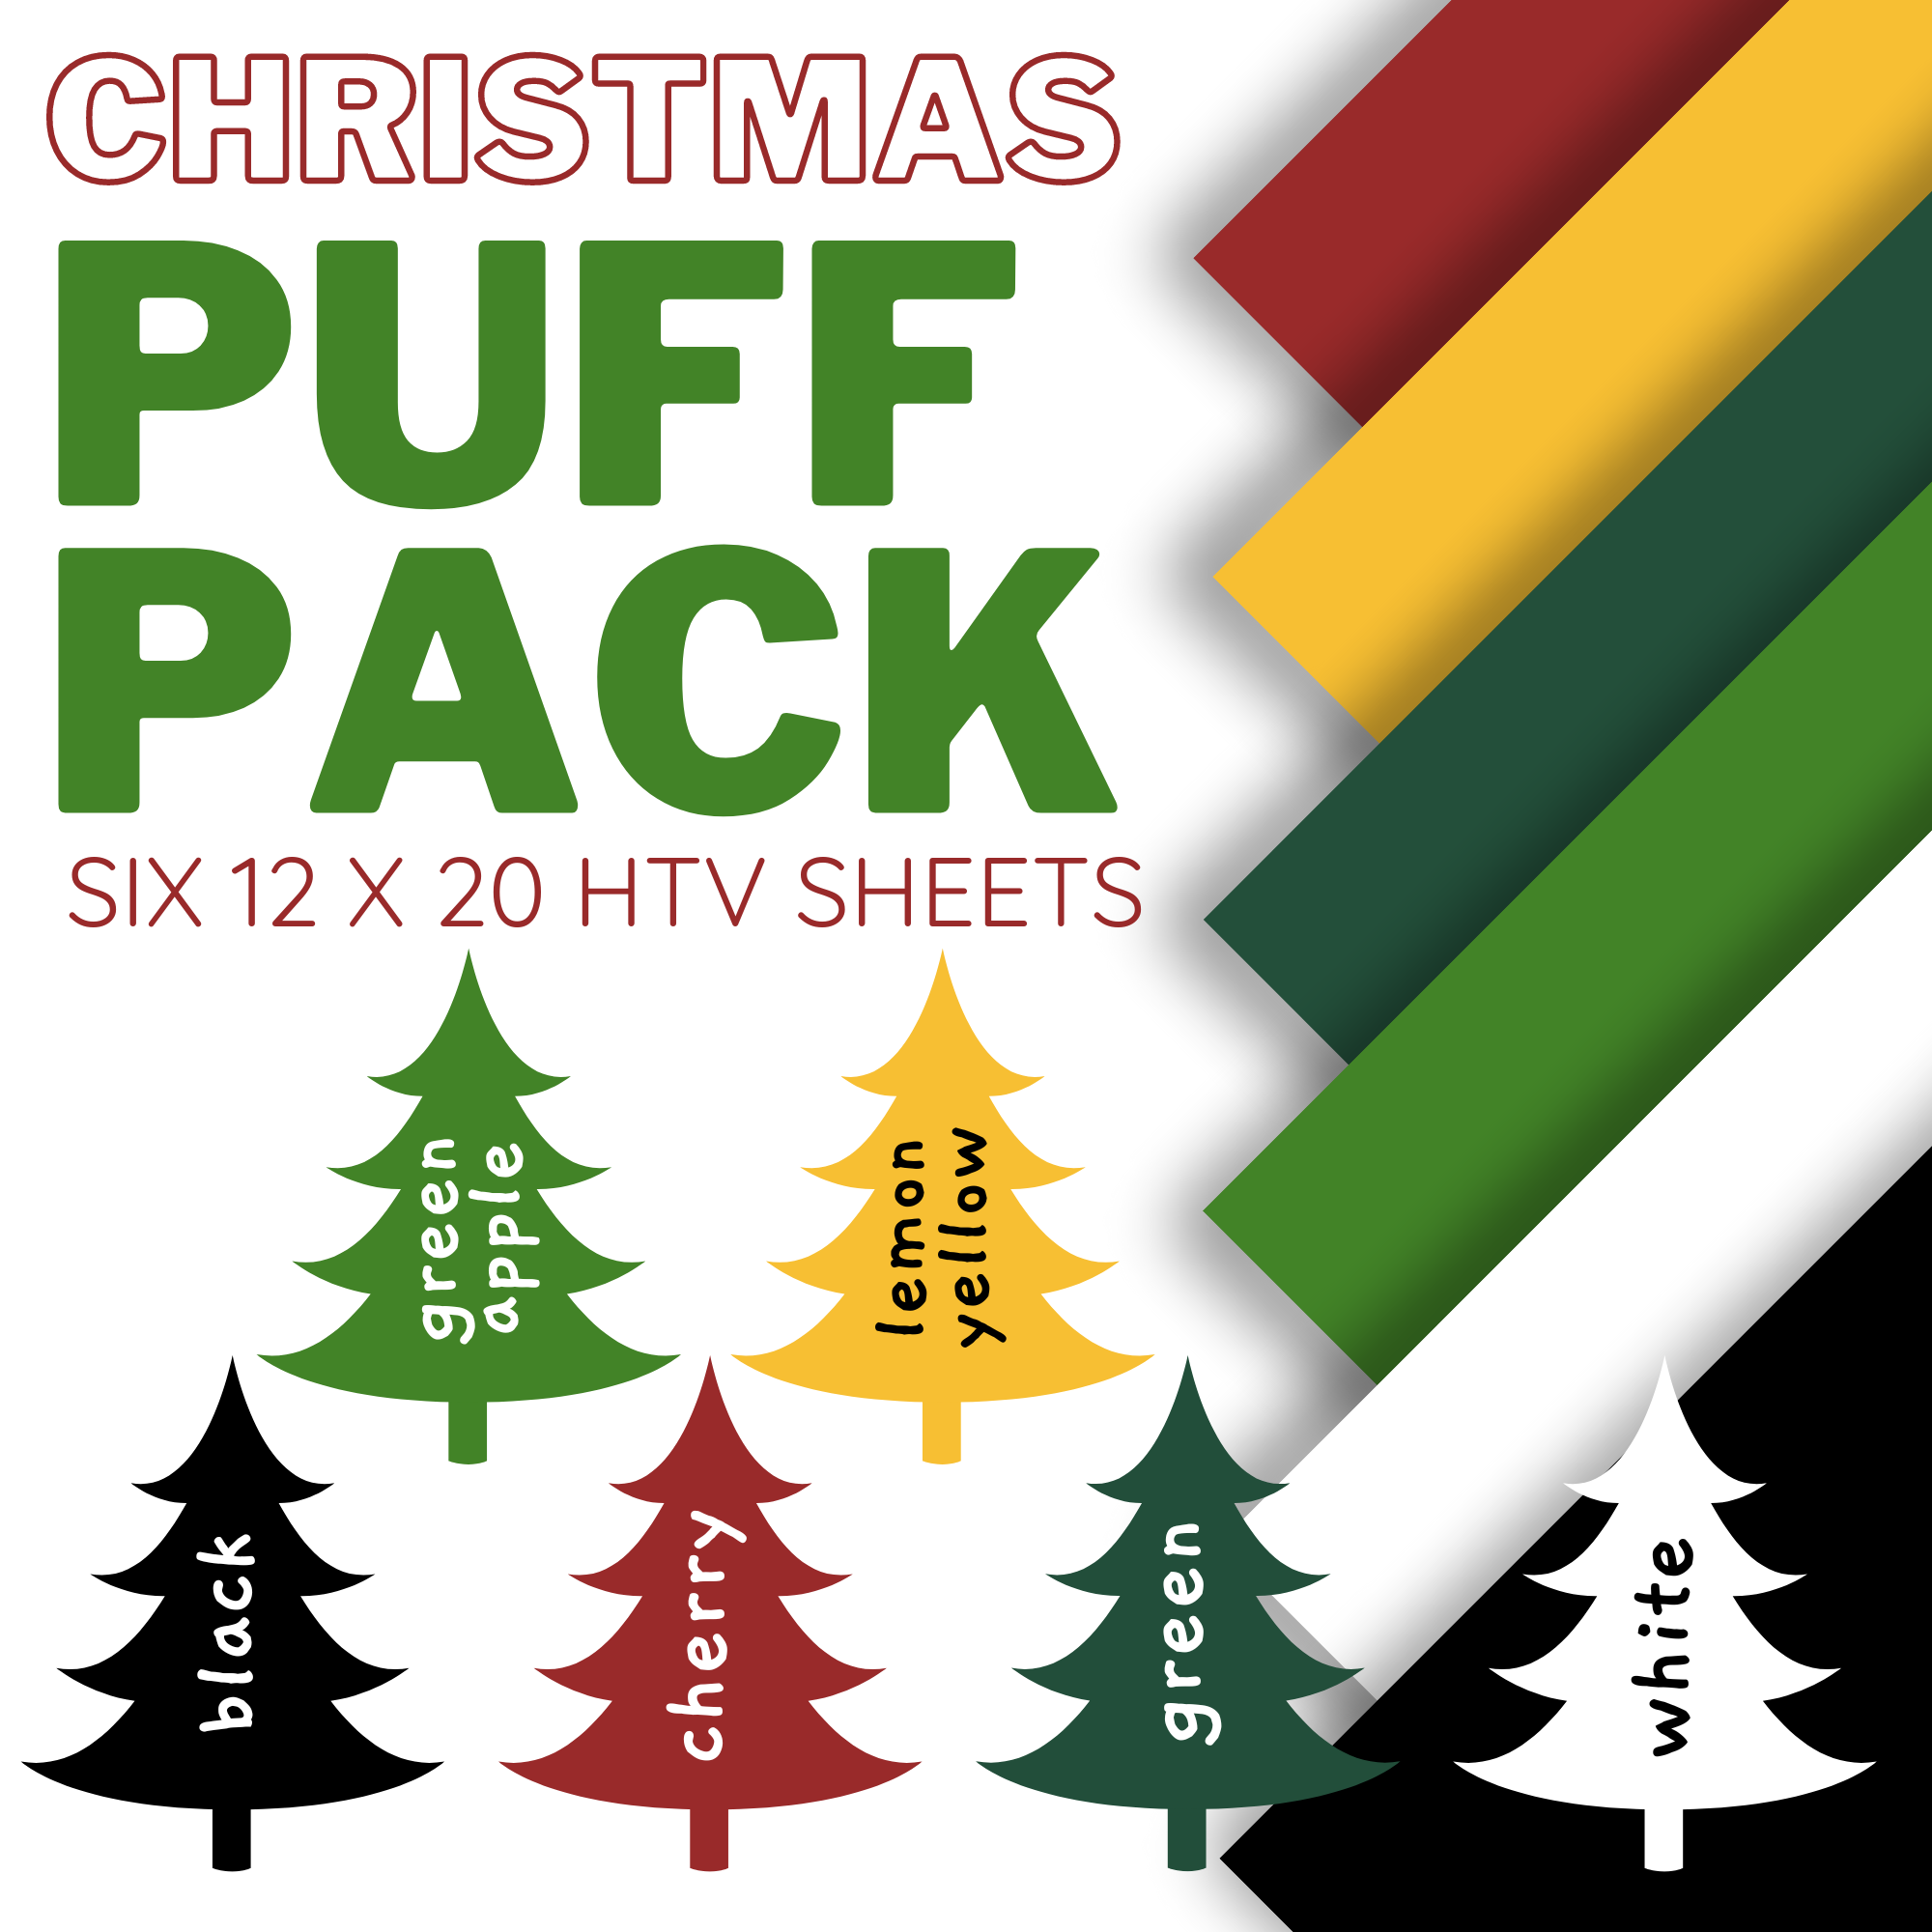 "Christmas" Puff 3D HTV Pack